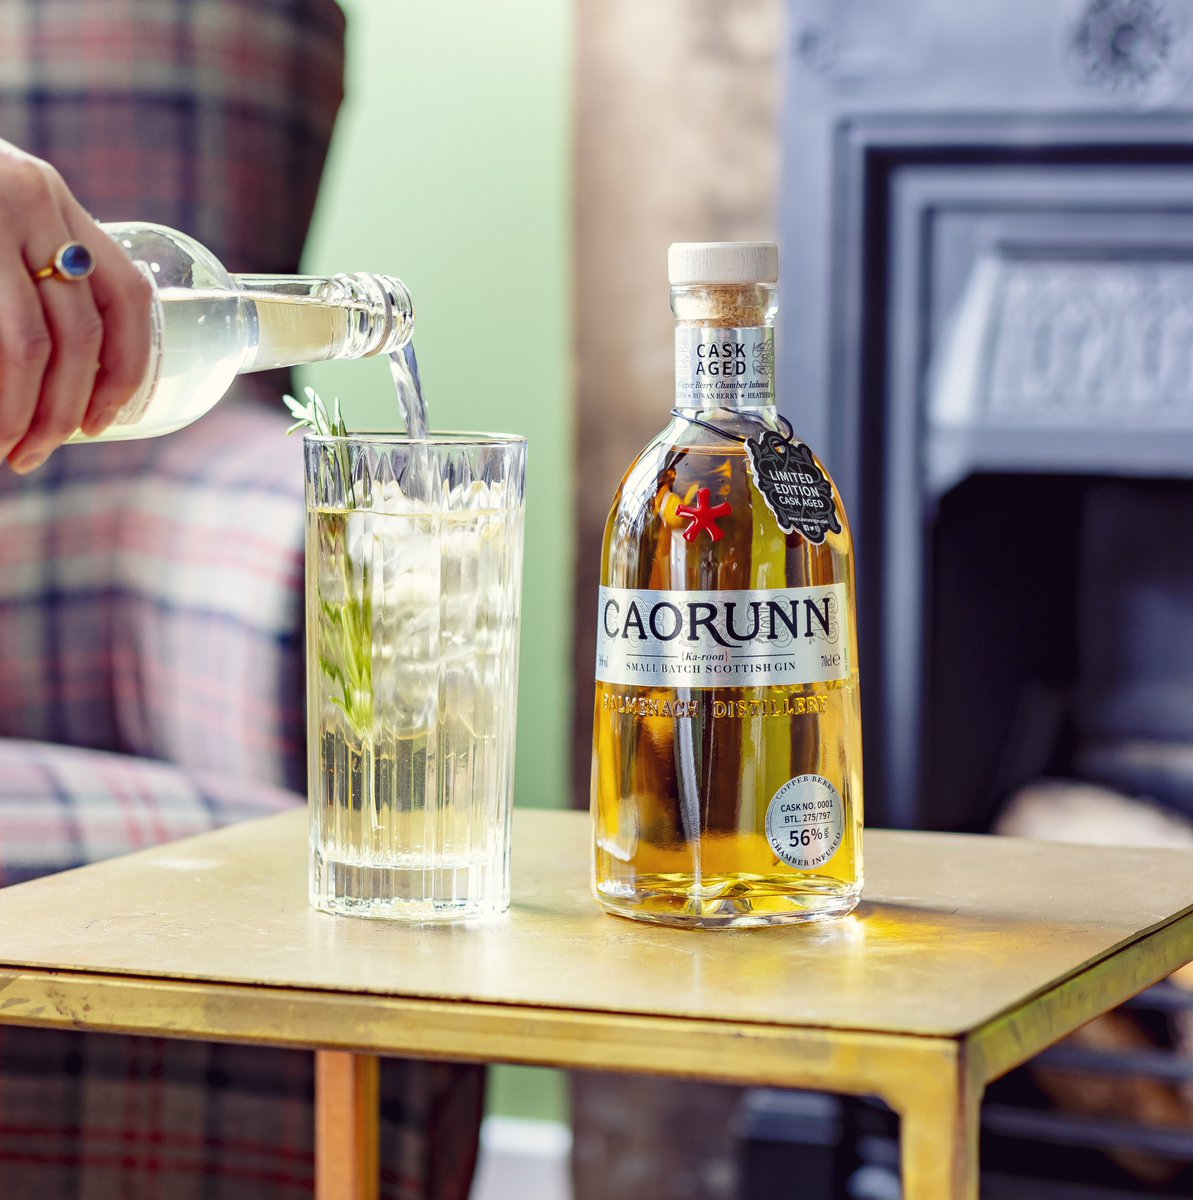 Embark on a journey through time and taste with Caorunn Cask Aged Gin. Rested in the finest hand selected Spanish Oak Casks, inspiring flavours of sweet spice and candied citrus. 🥃 It doesn't take a Gin Genius to drink responsibly. #CaorunnCaskAged #GinGenius #Caorunn